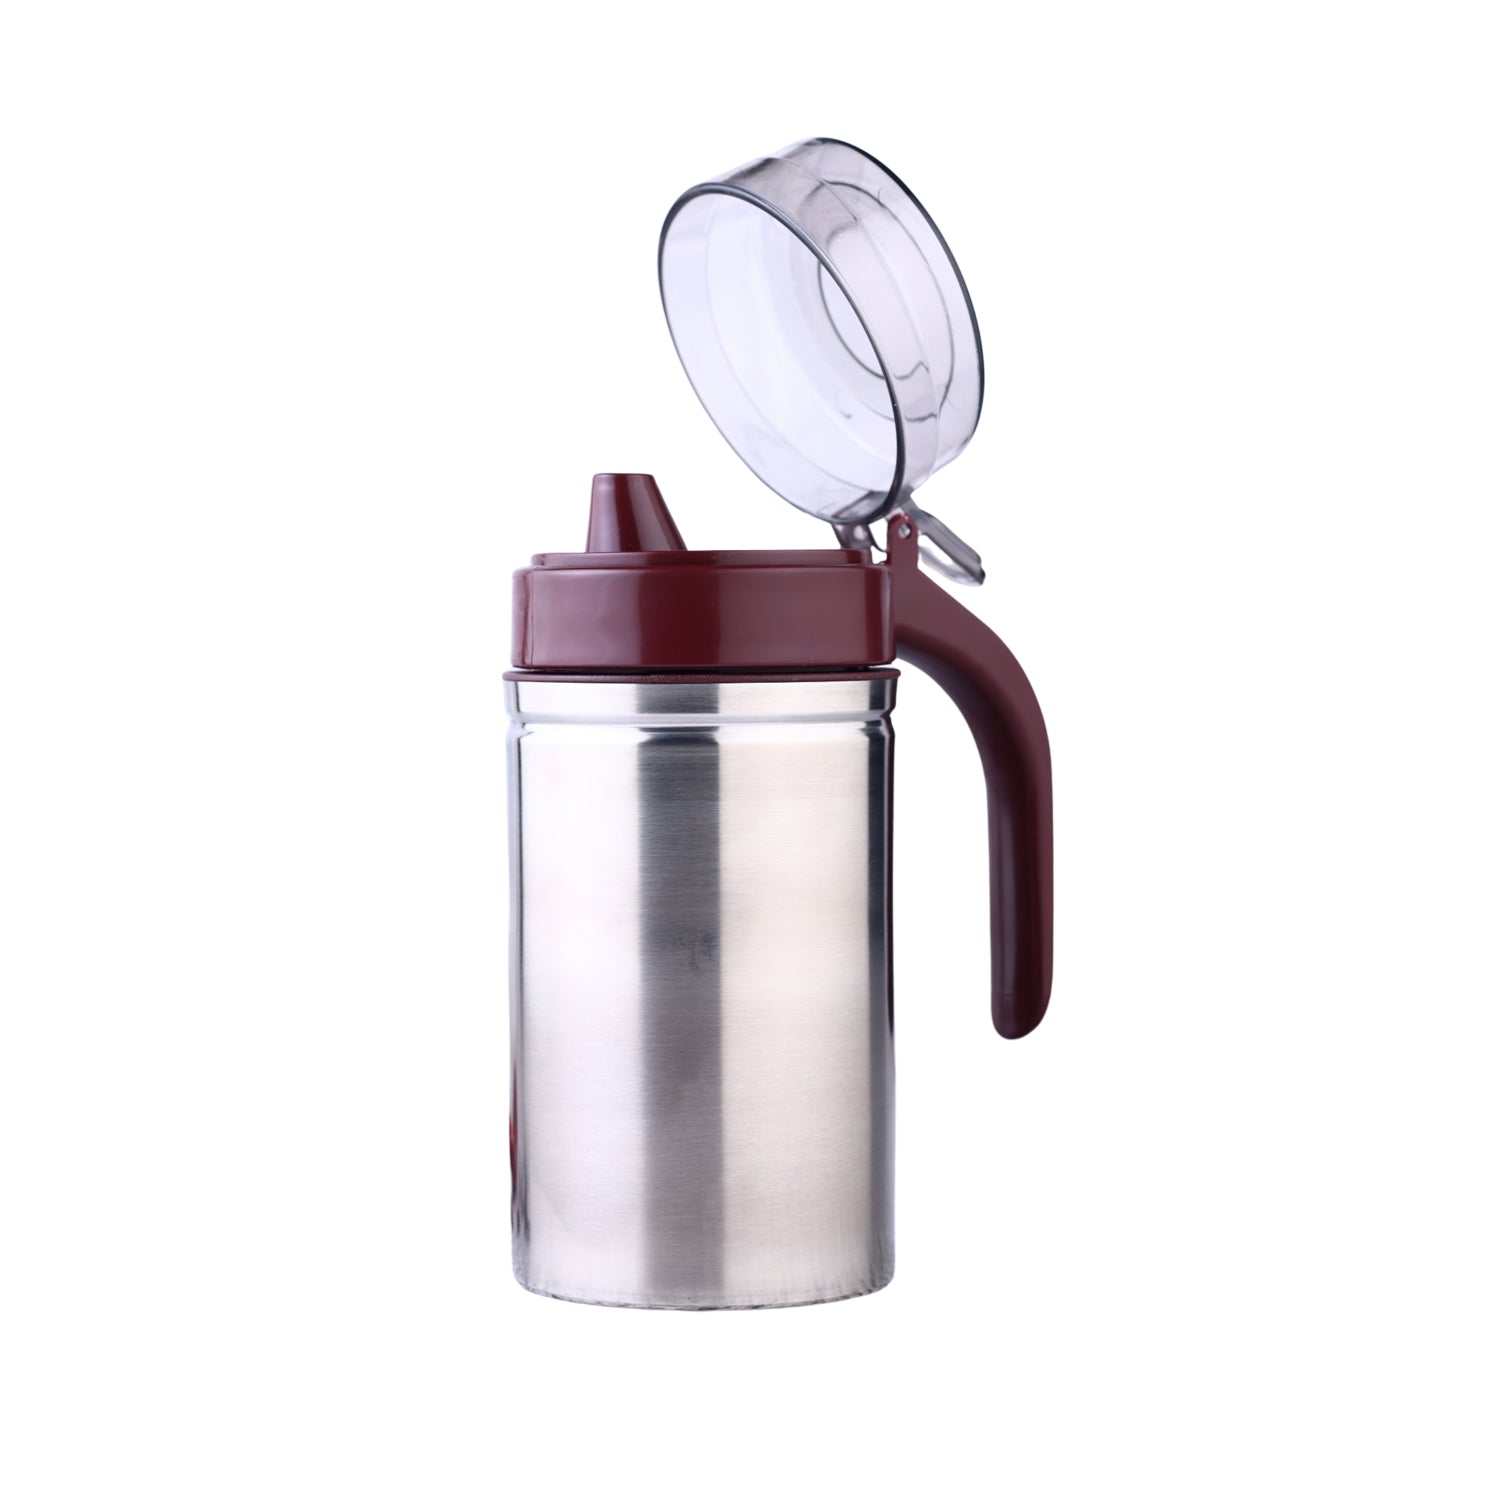 8126 Oil Dispenser Stainless Steel with small nozzle 500ML Oil Container. DeoDap